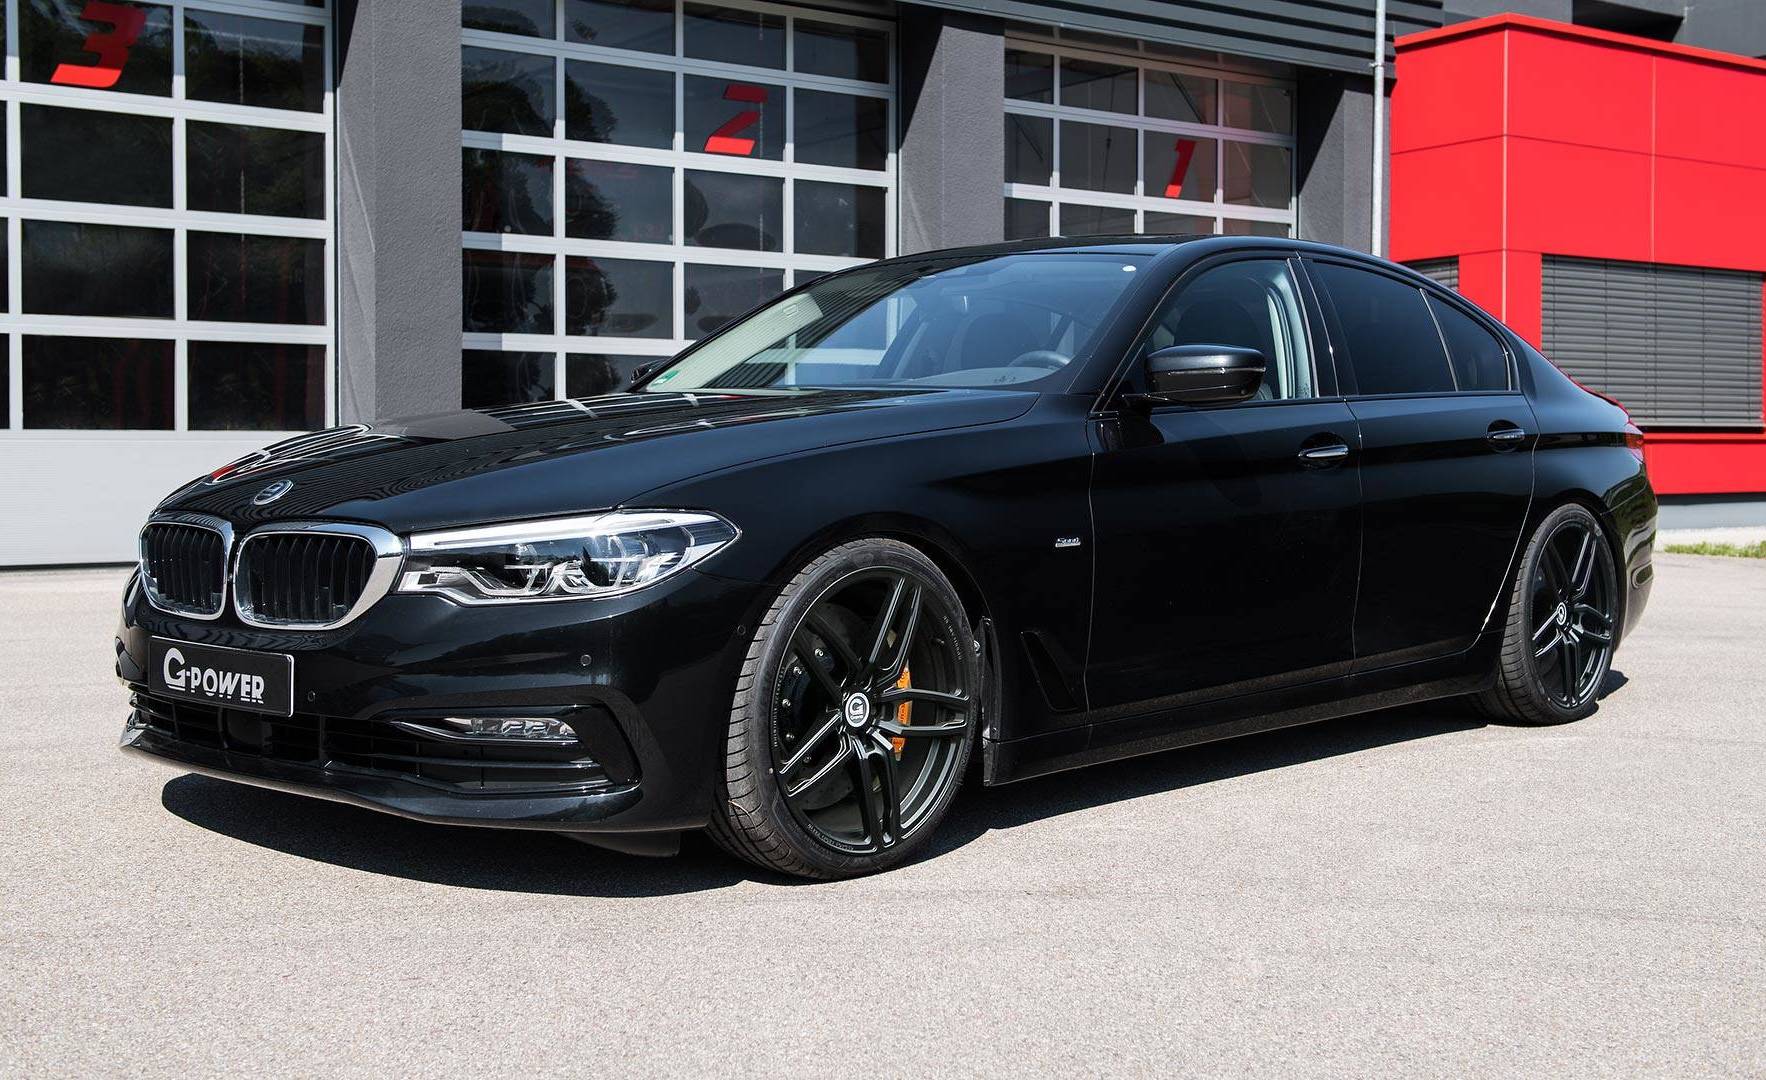 G-Power tunes up the new BMW 5 Series, including M550d